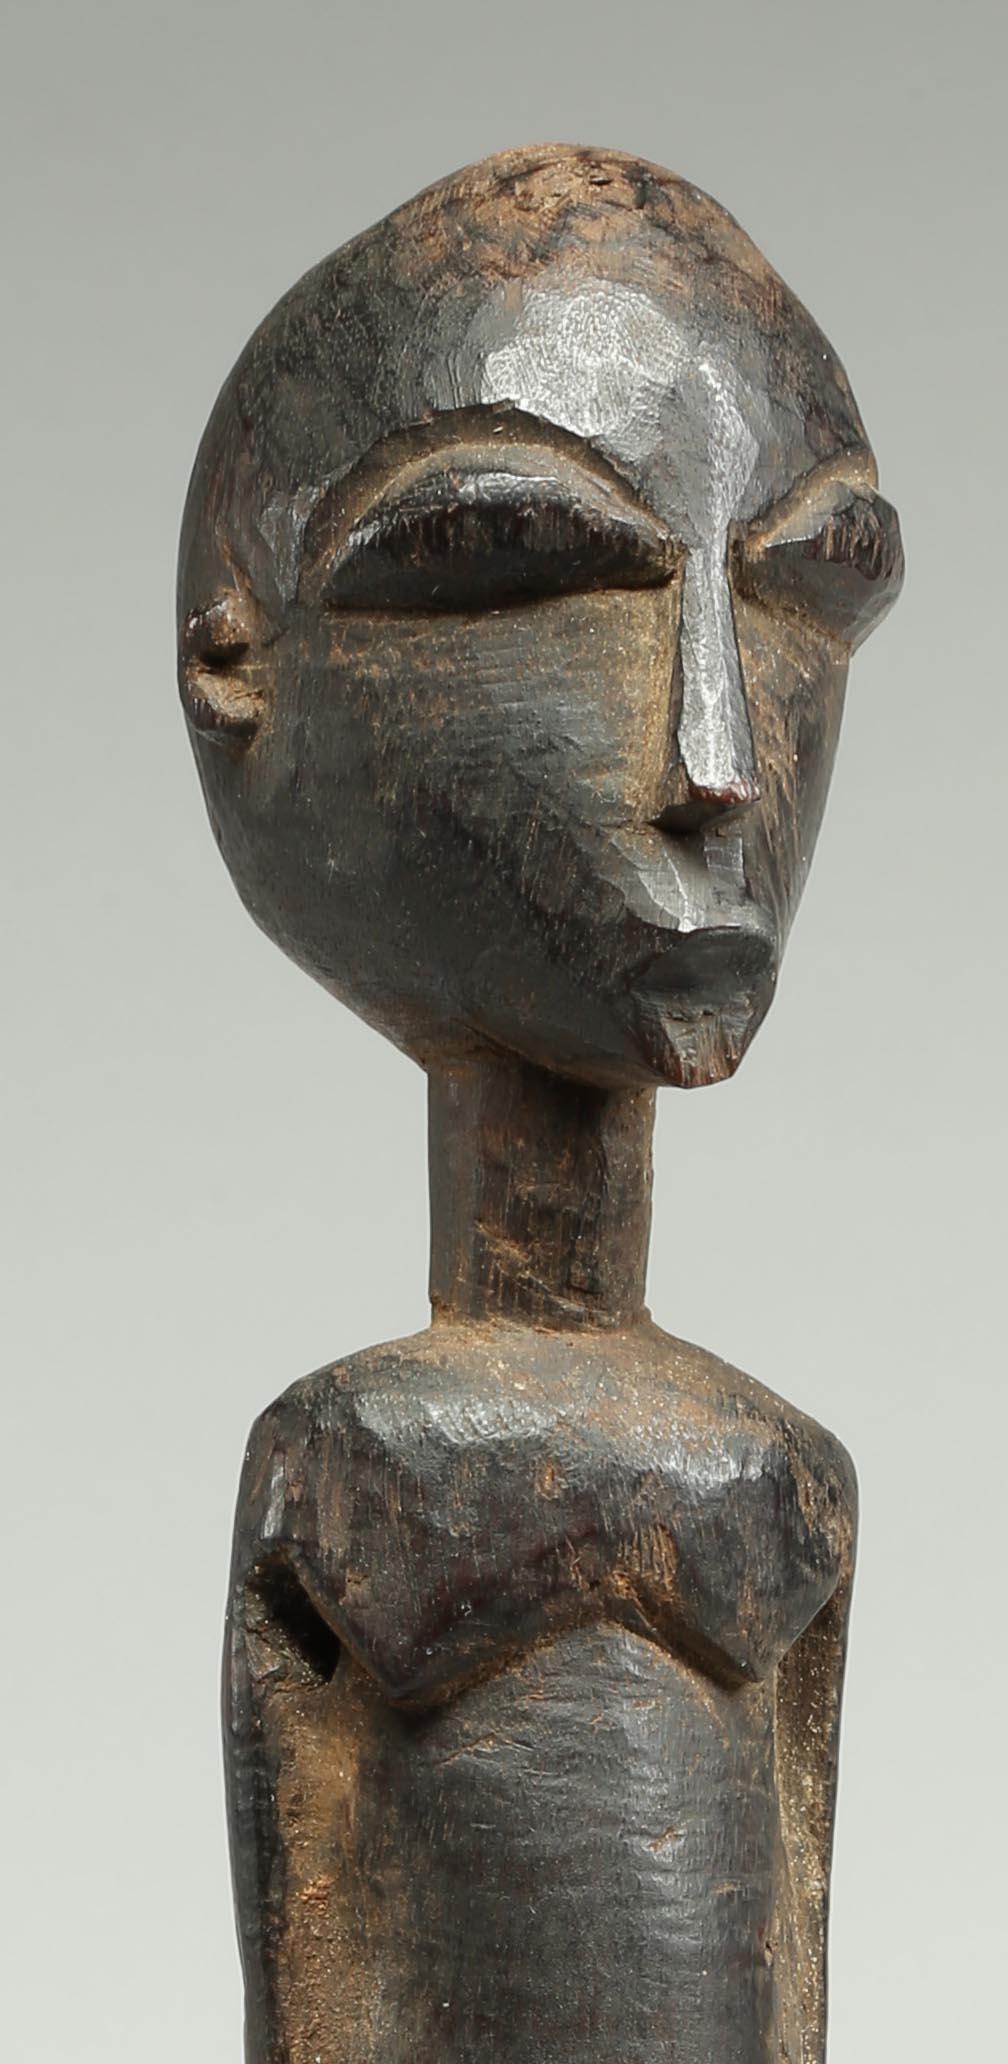 Wood Tall Elegant Standing Lobi Figure with Expressive Face, Early 20th Century Ghana